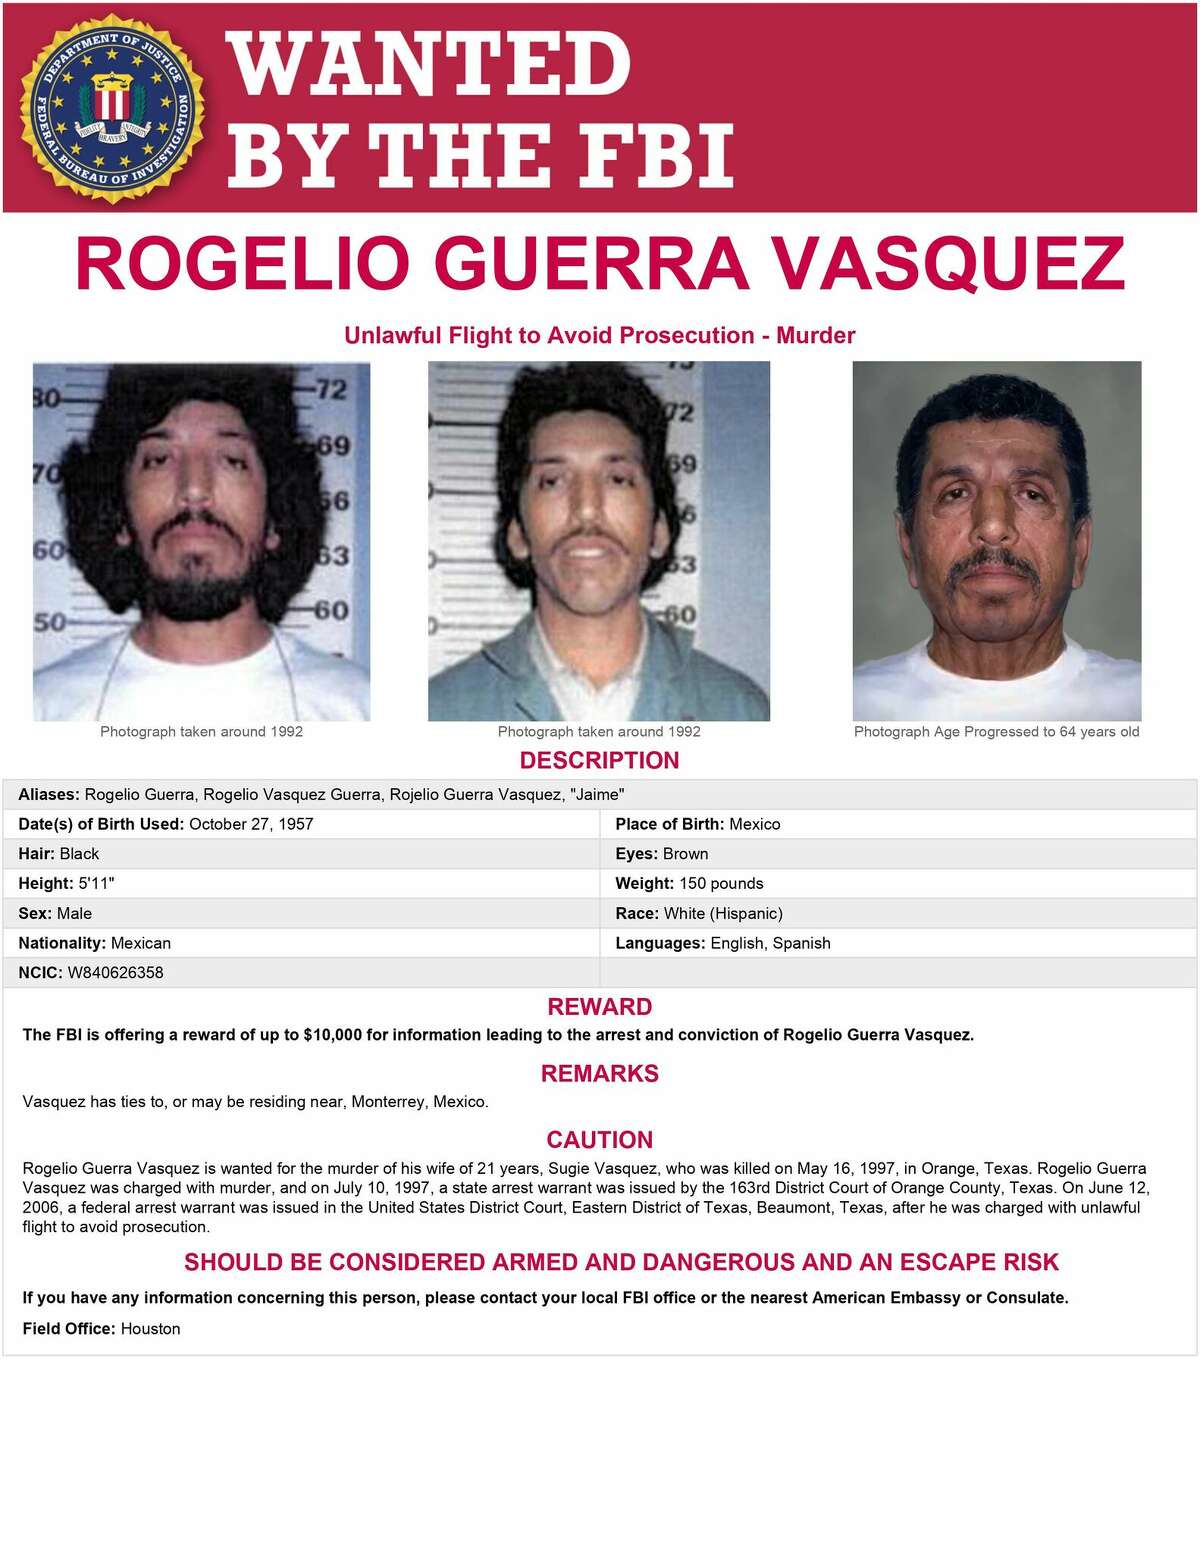 Rogelio Guerra Vasquez is wanted  for the murder of his wife Sugie Vasquez on May 16. 1997 in Orange.